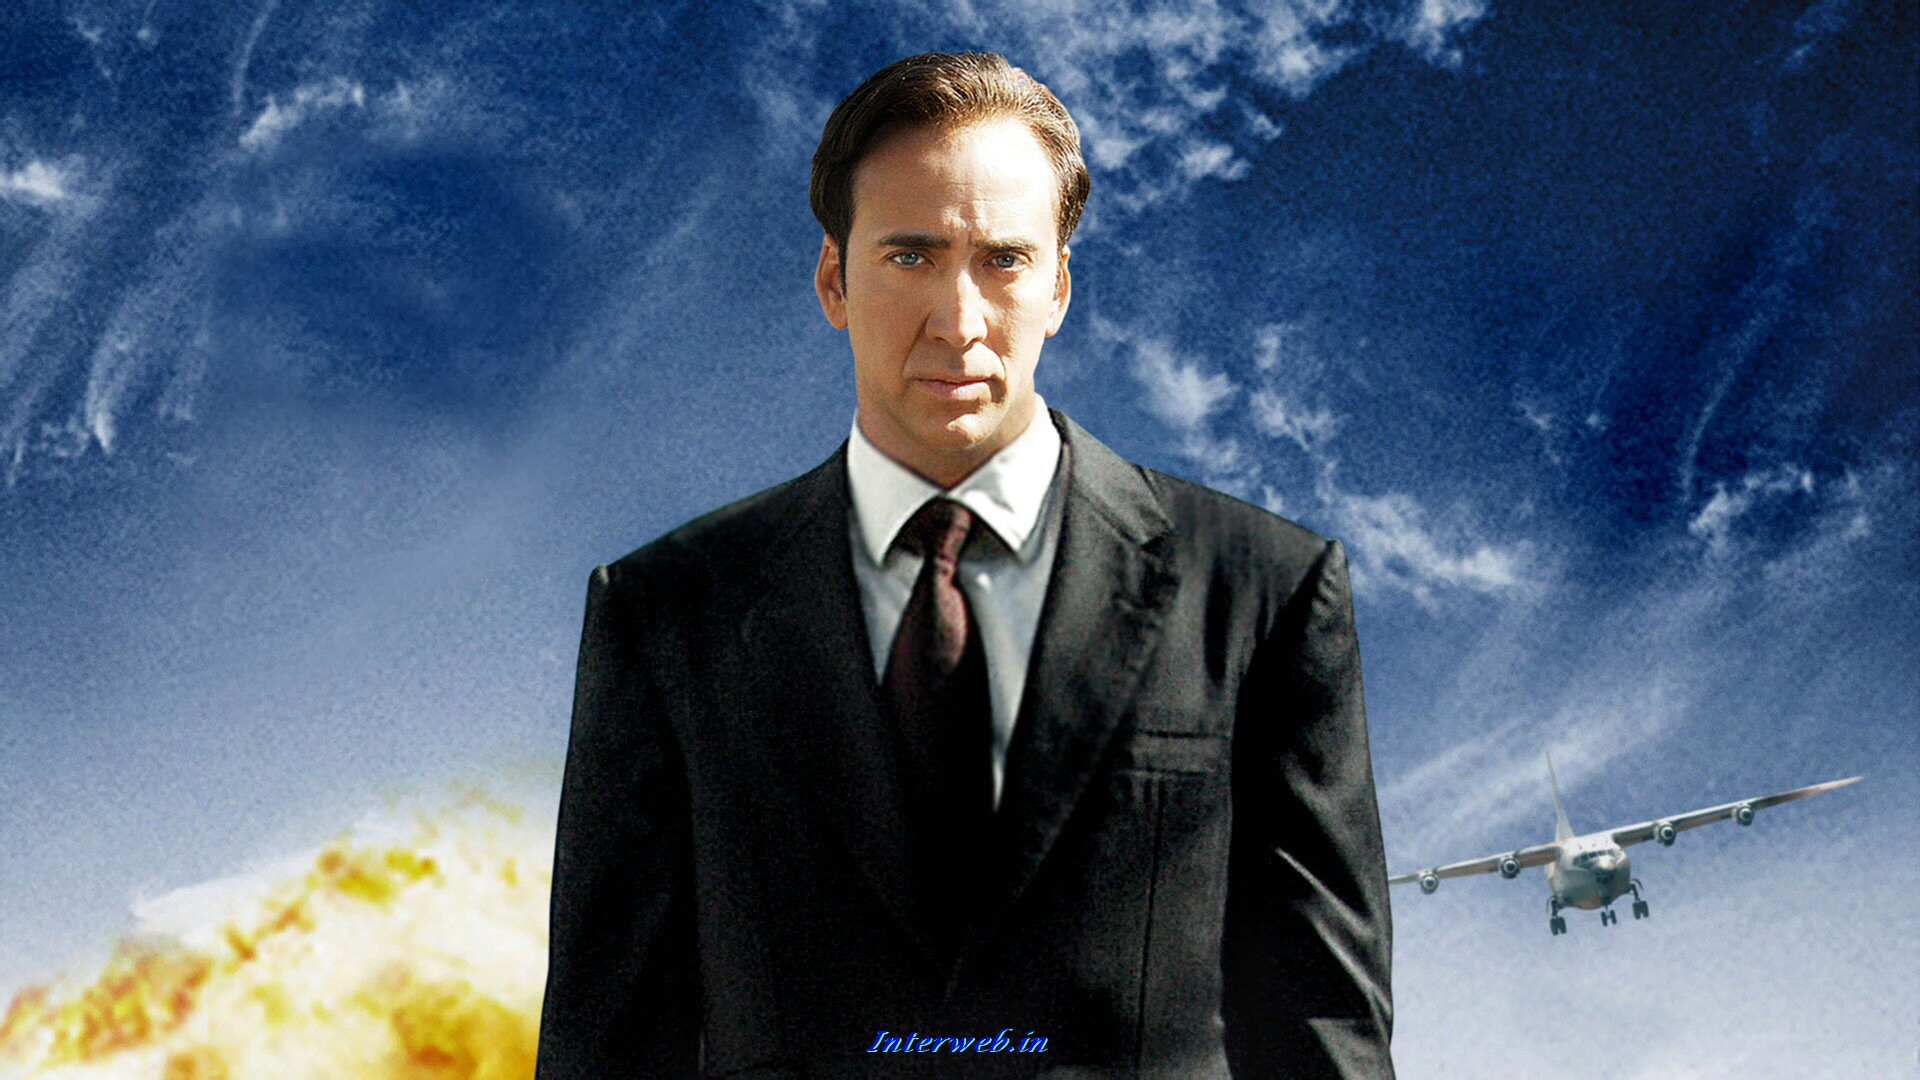 Nicolas Cage Lord Of War Wallpaper And Image